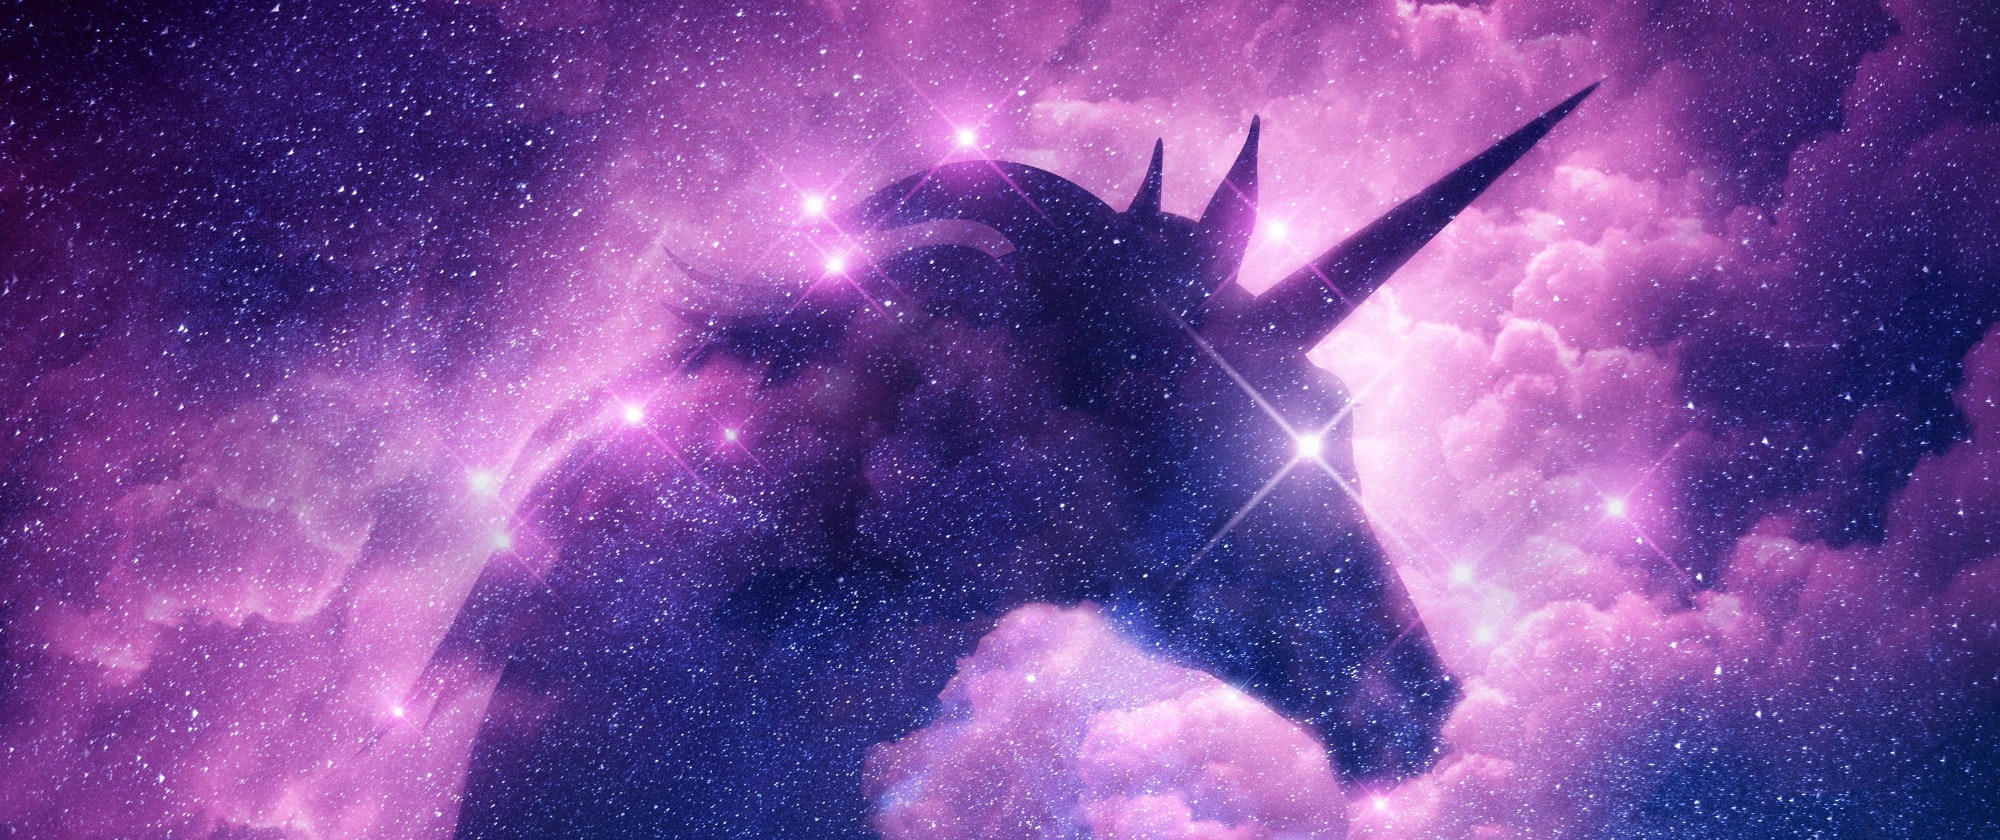 NEW-IMAGES Blogs Unicorn-banner-new